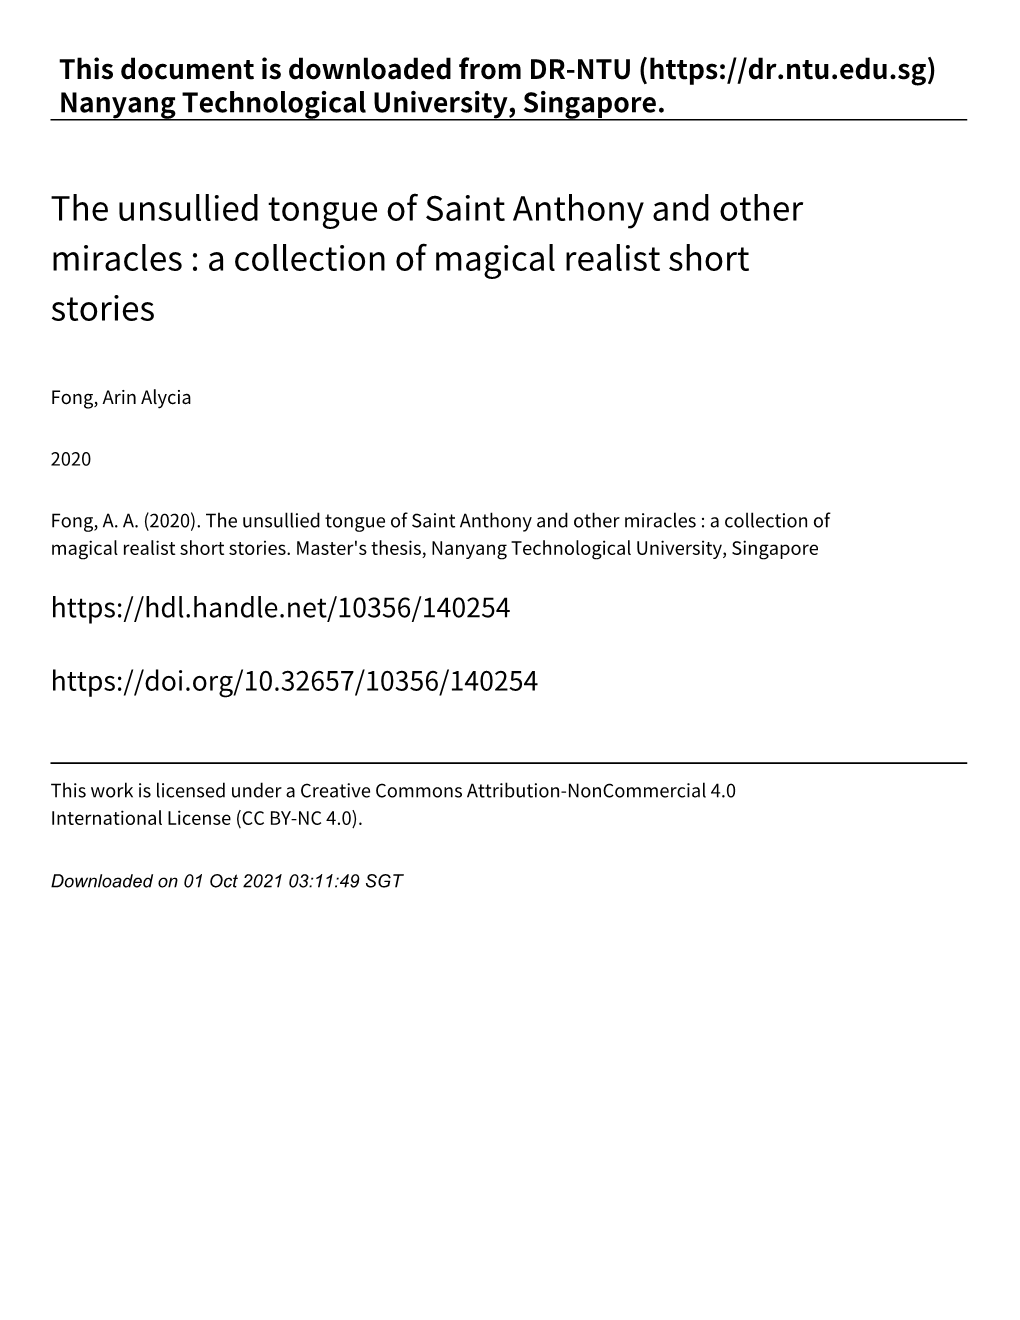 The Unsullied Tongue of Saint Anthony and Other Miracles : a Collection of Magical Realist Short Stories